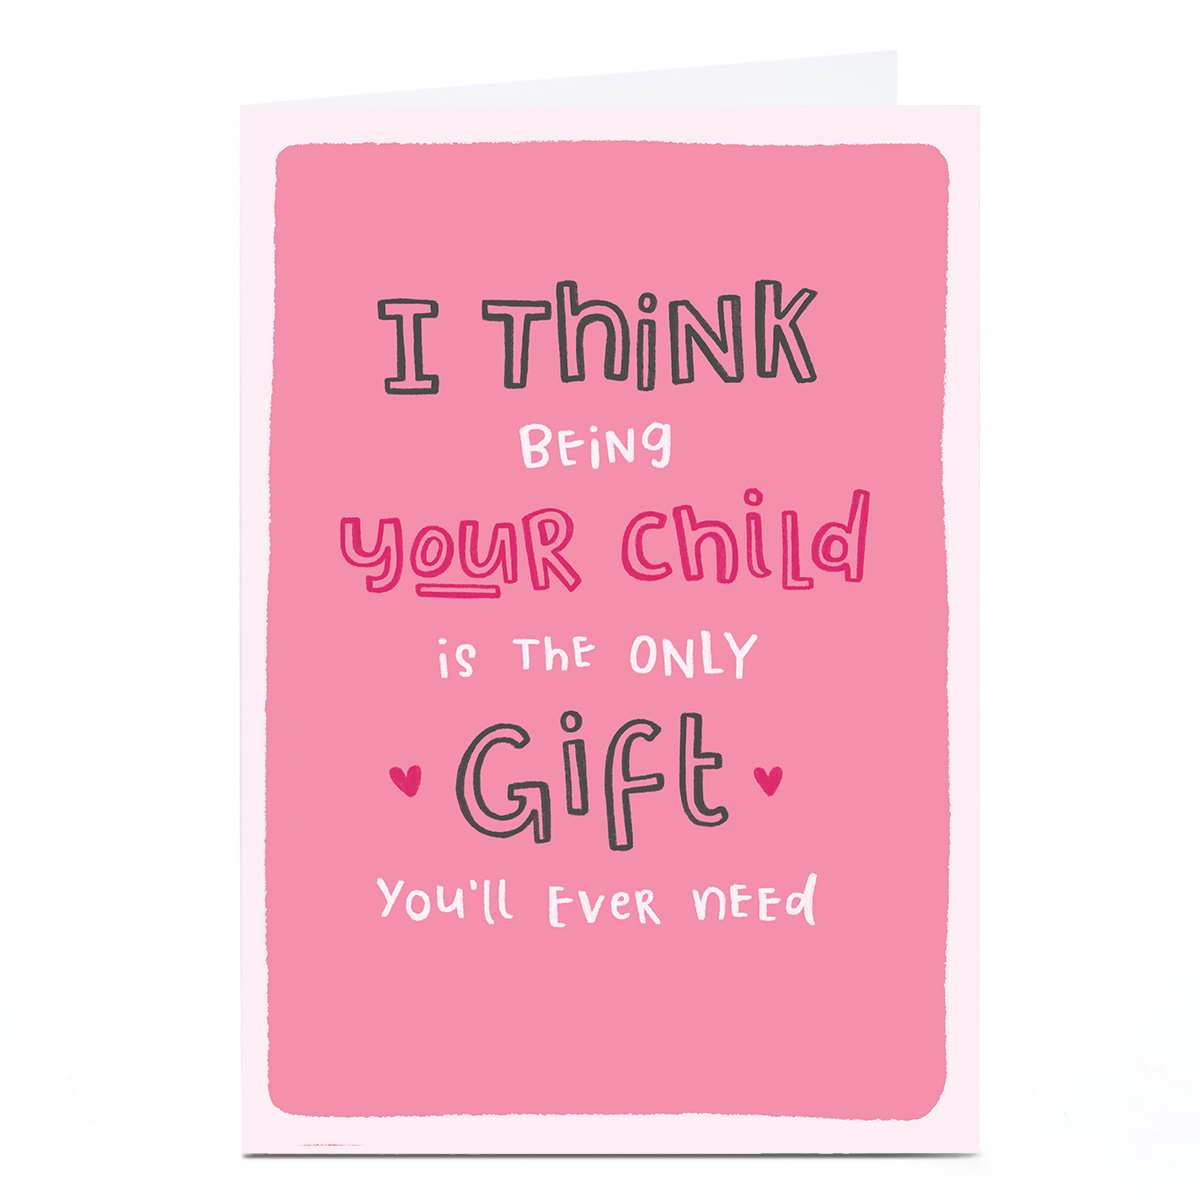 Personalised Blue Kiwi Mother's Day Card - Being Your Child